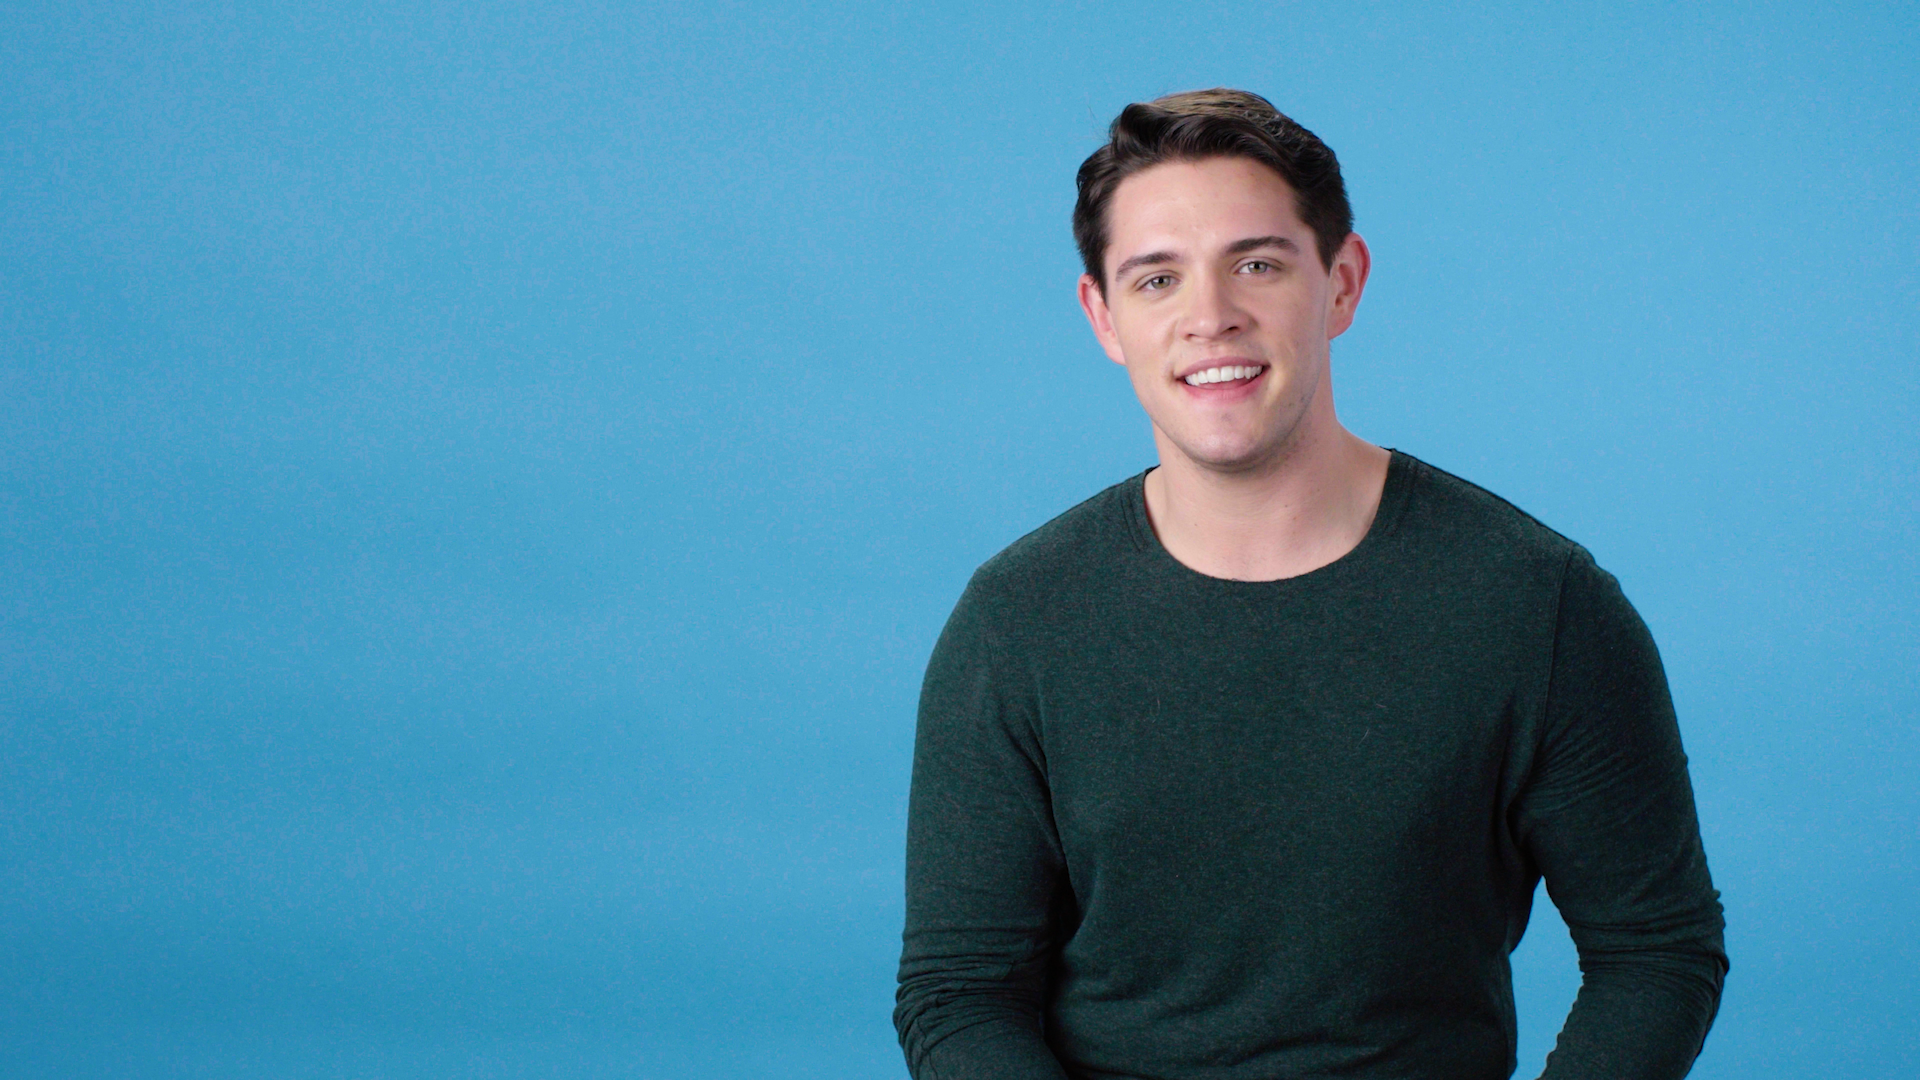 Riverdale Memes, Reviewed by Casey Cott